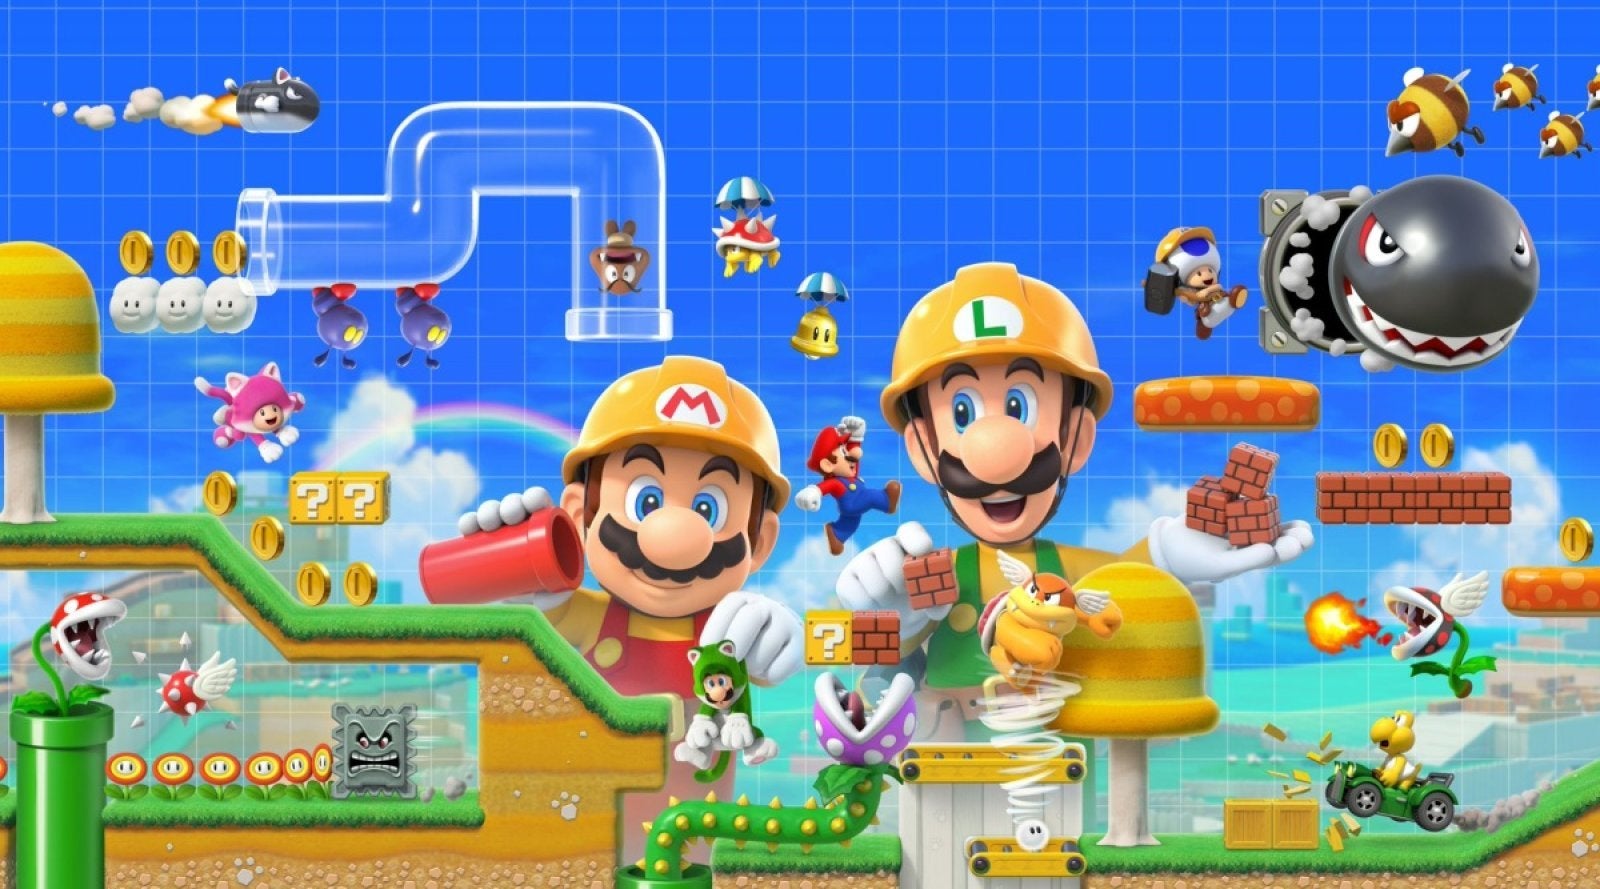 Image for Super Mario Maker 2 review: a simple sequel that still manages to exceed expectations